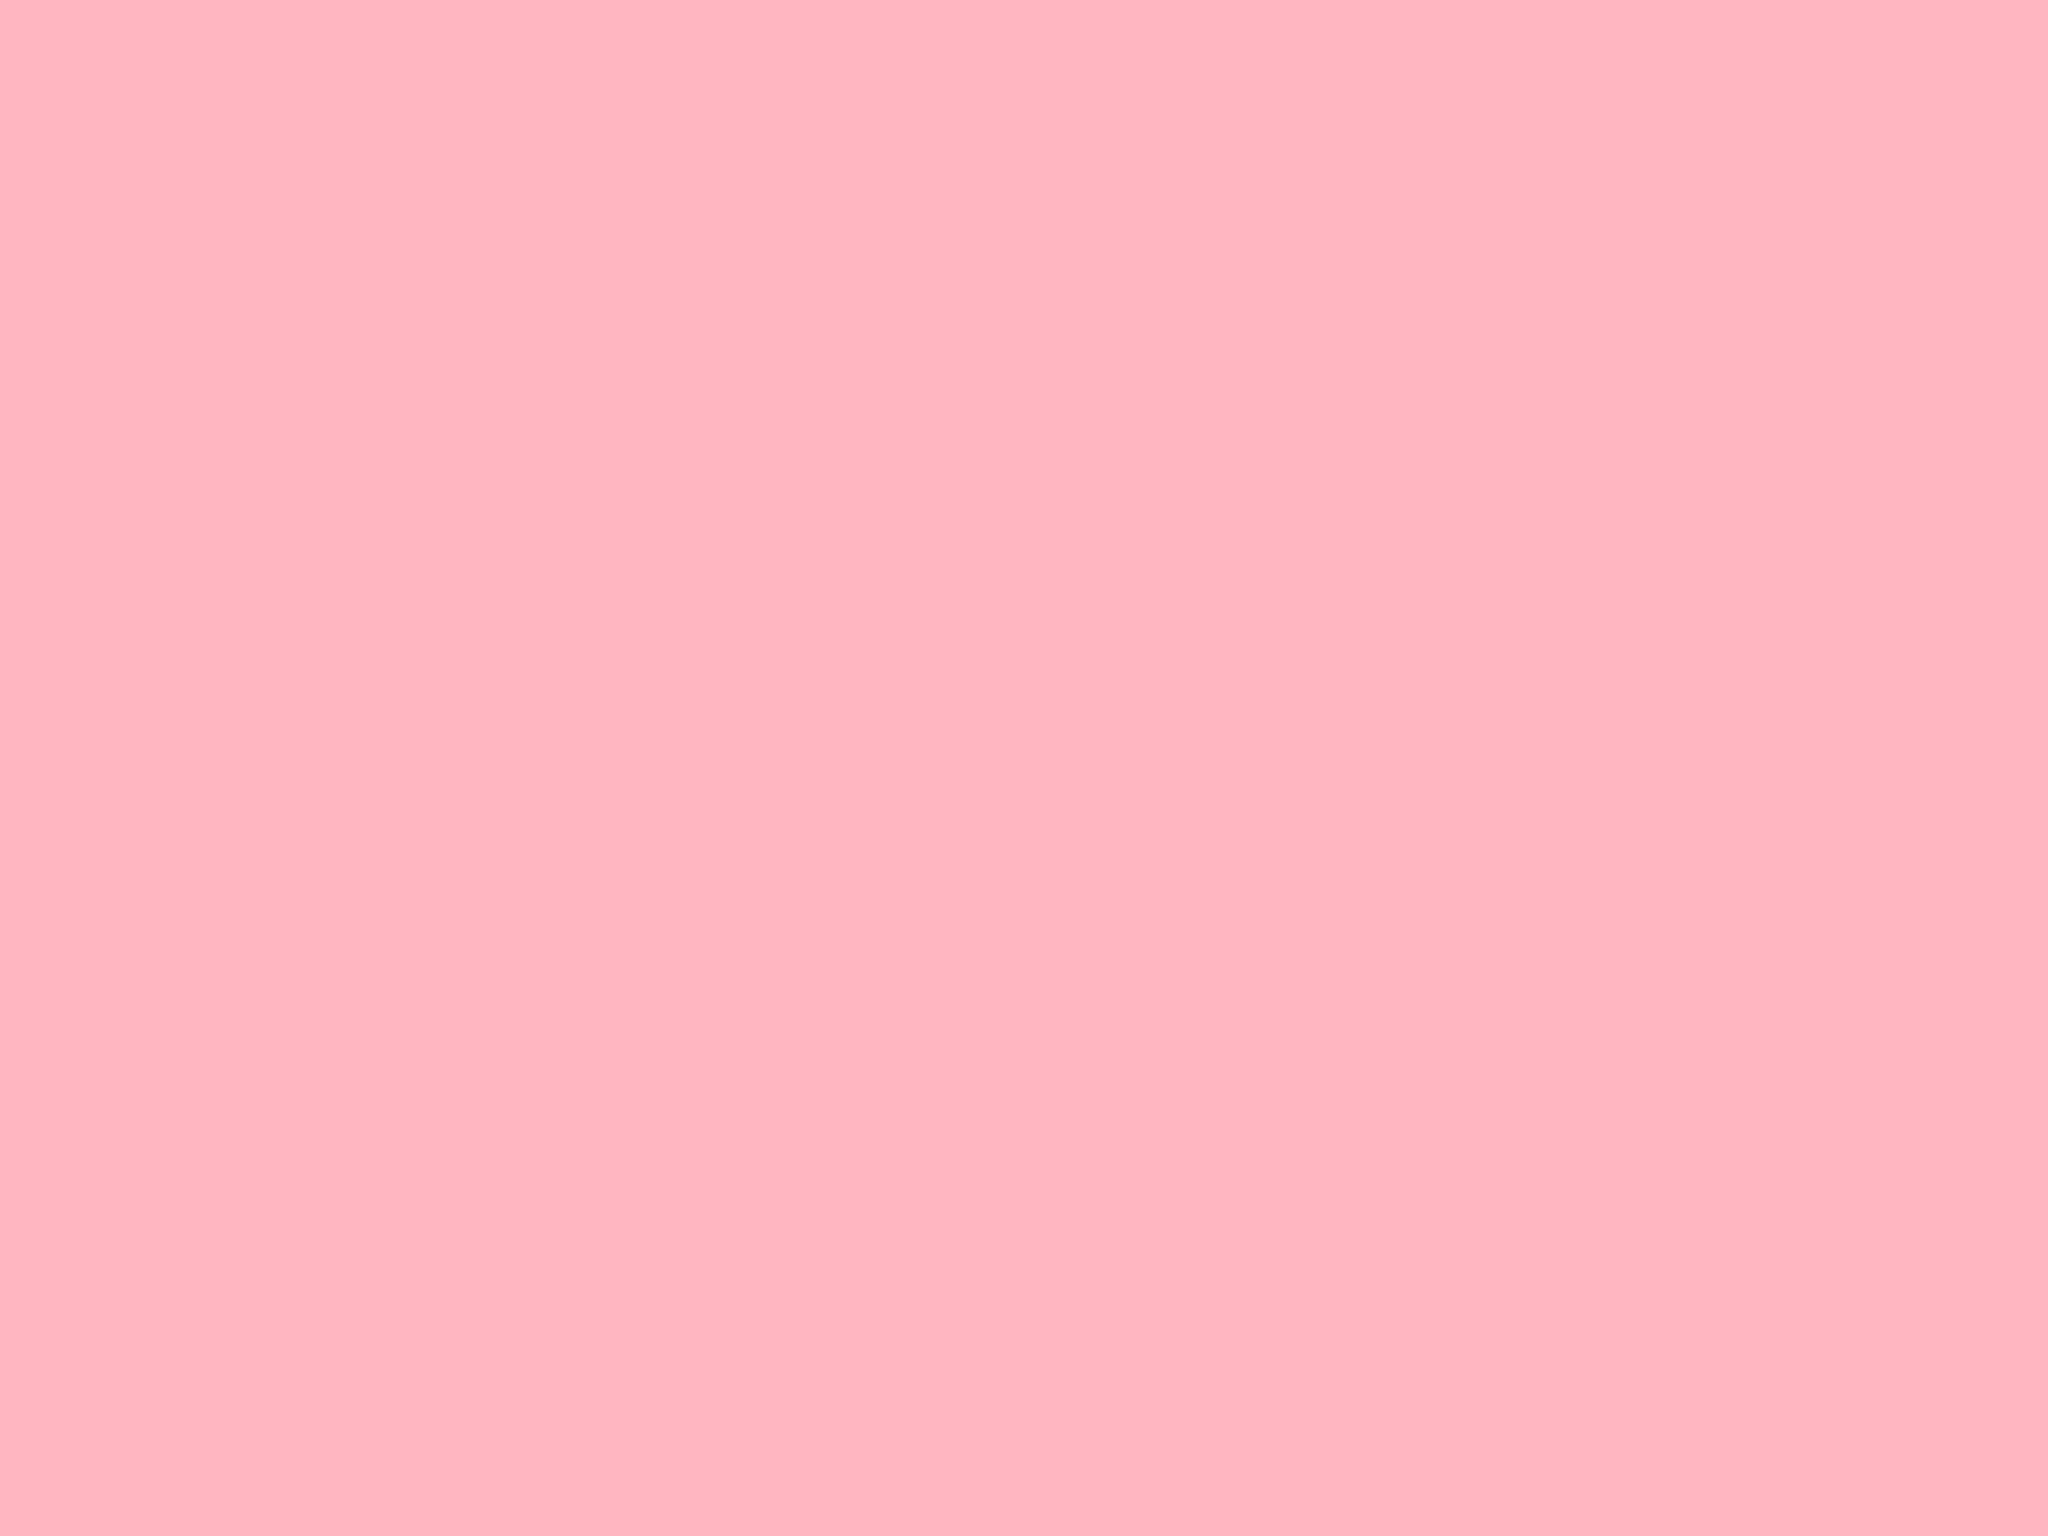 solid light pink iphone wallpaper – Google Search